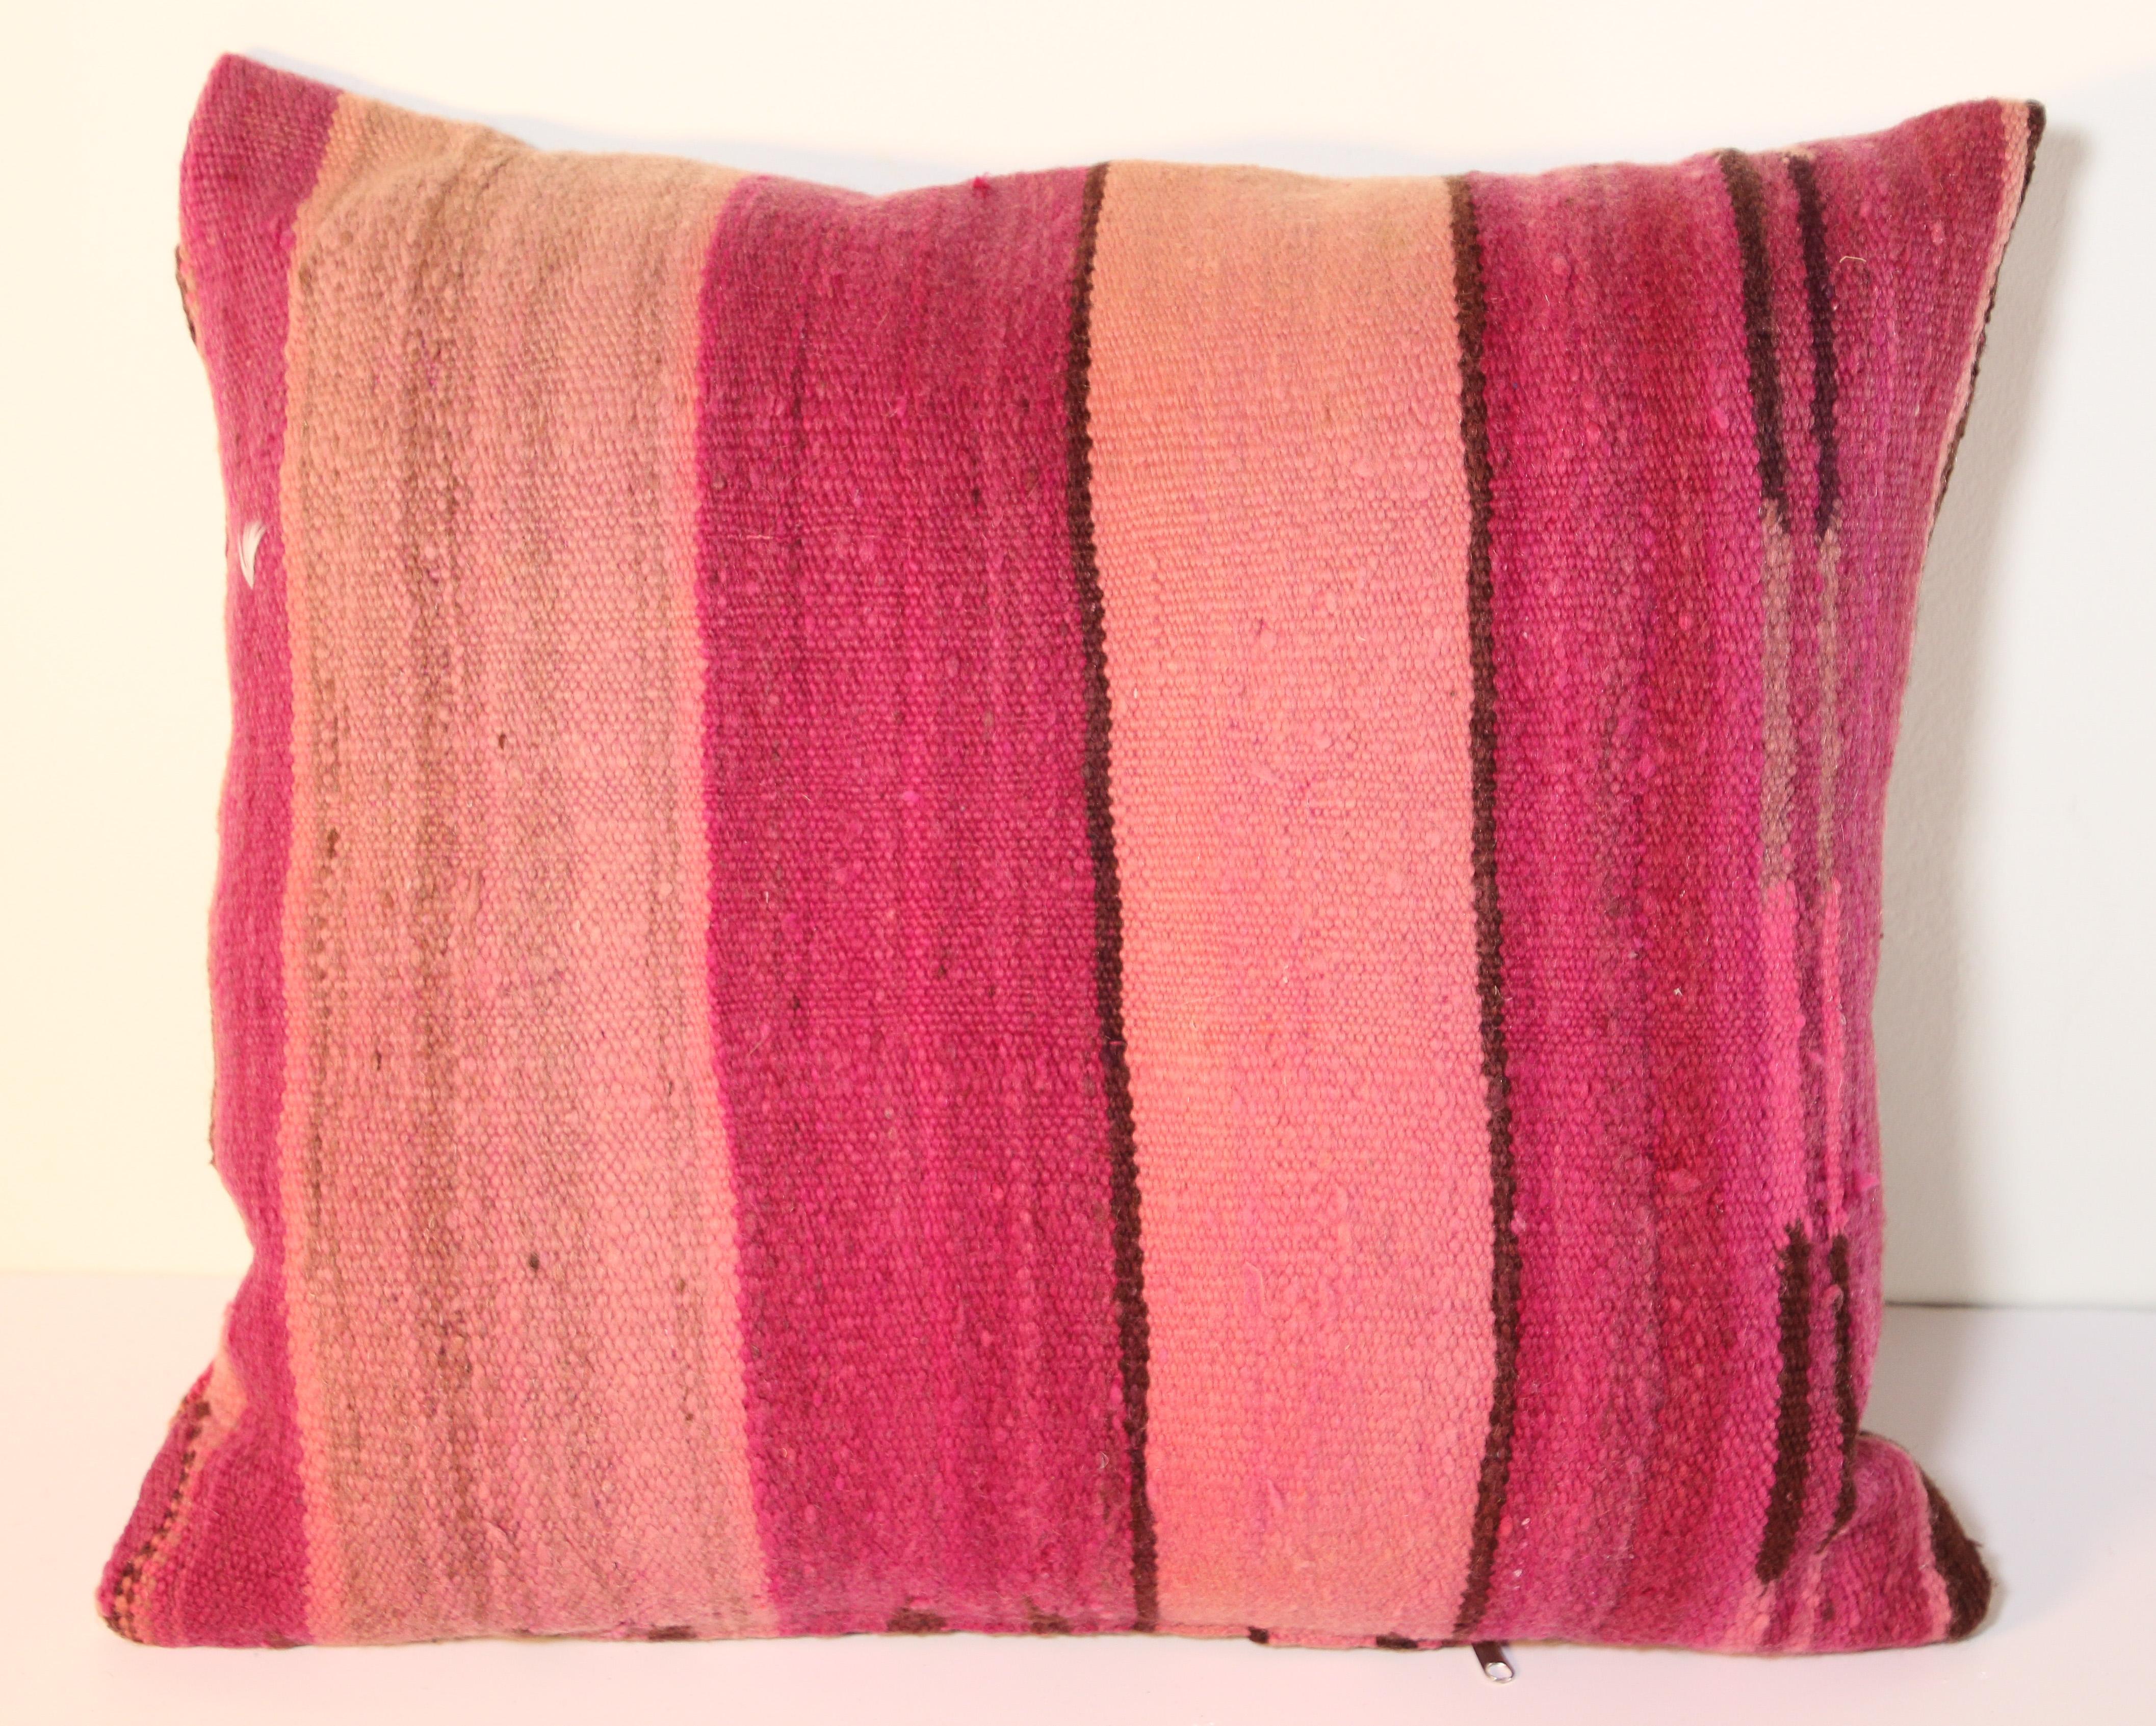 Wool Moroccan Tribal Lumbar Pillow Cut from a Vintage Beber Stripes Rug